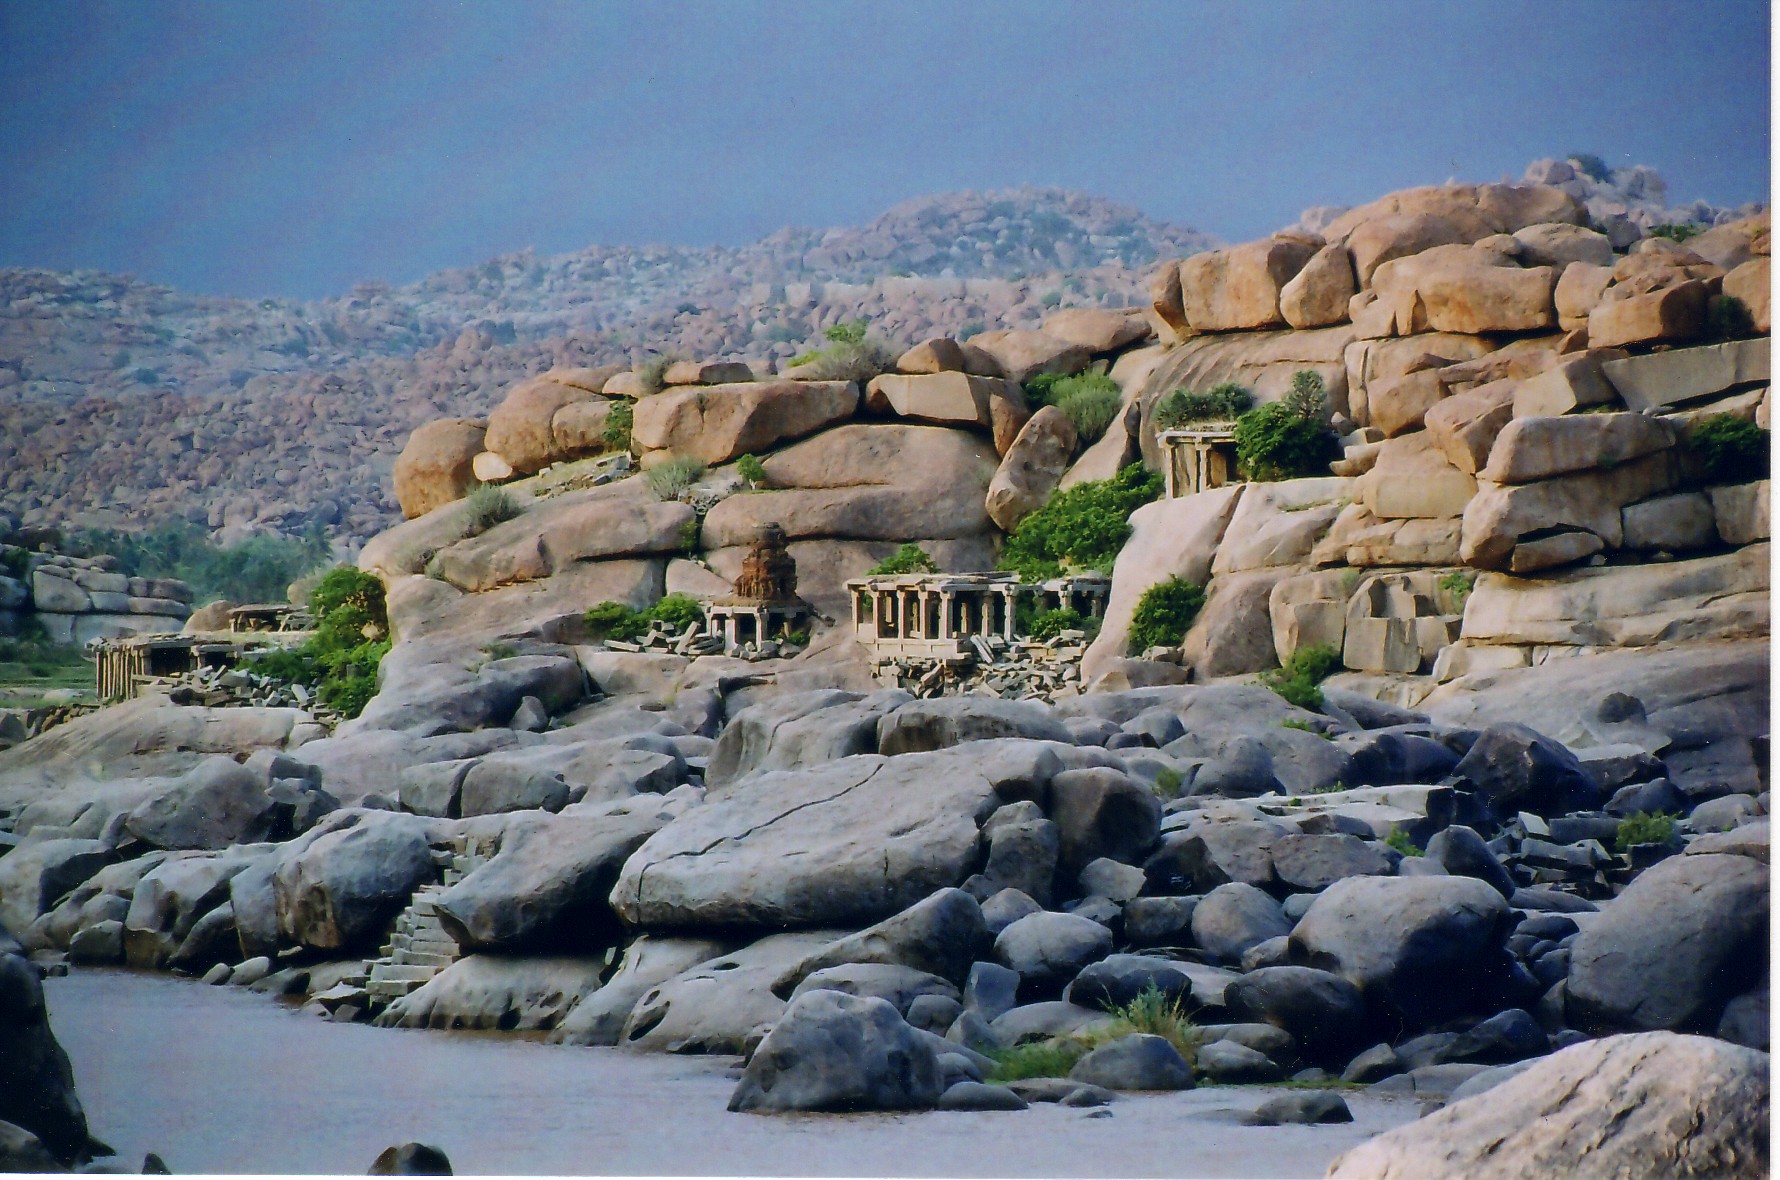 Panaromic_view_of_the_natural_fortification_and_landscape_at_Hampi.jpg